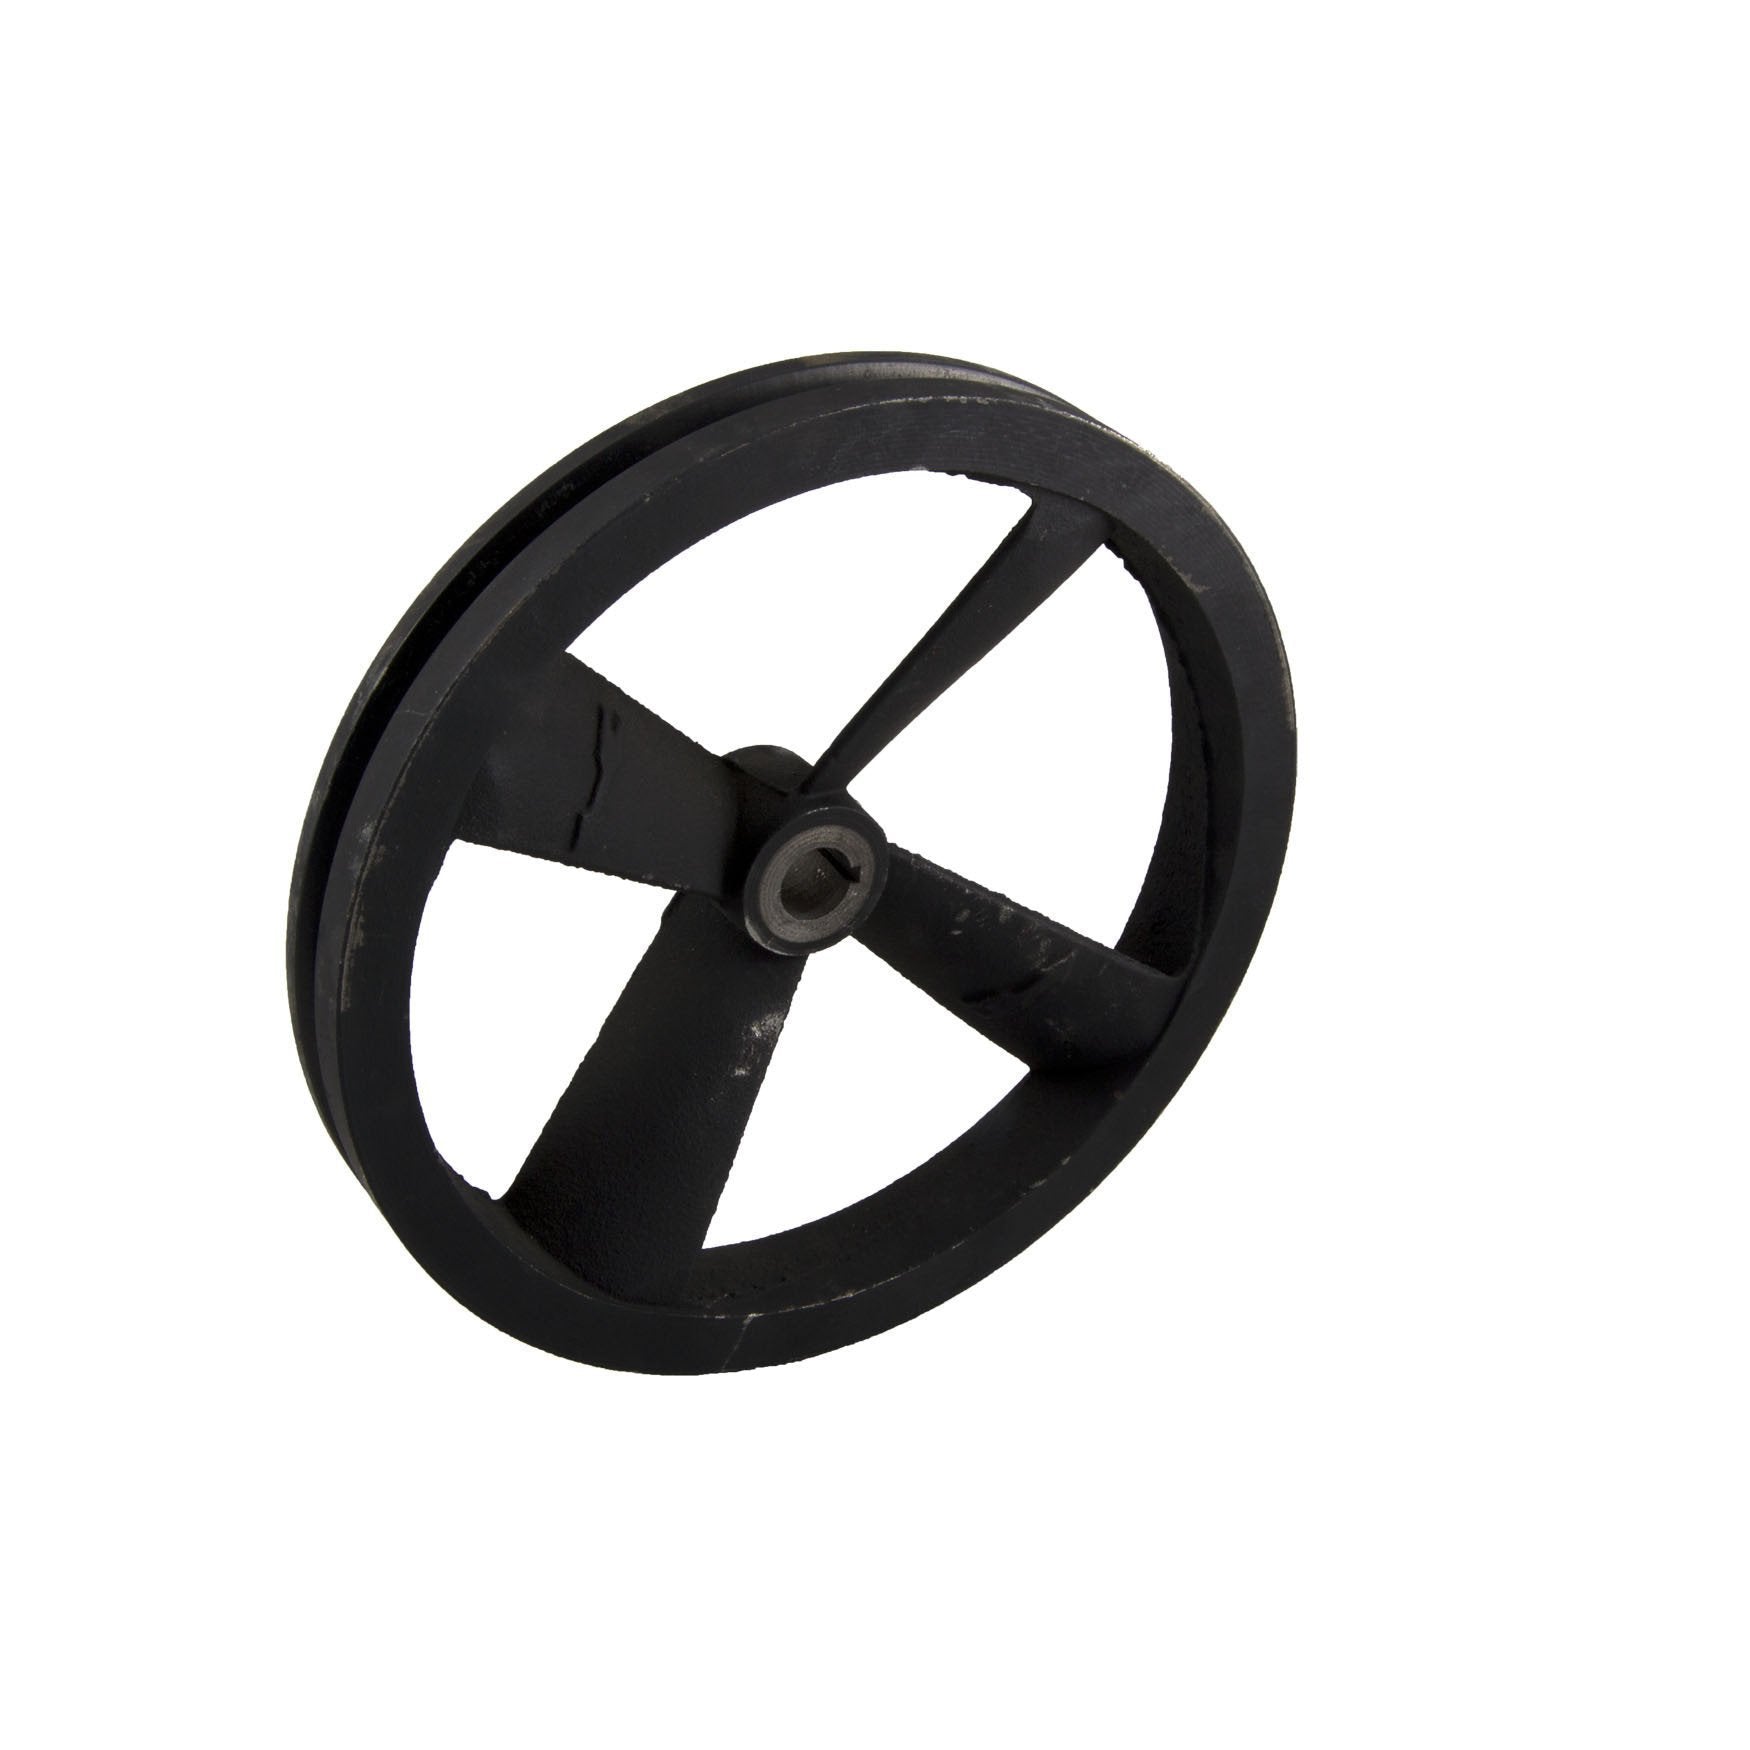 Pully/Flywheel For Iron Horse, Eagle And Max Air Air Compressor-air compressor parts-Tool Mart Inc.